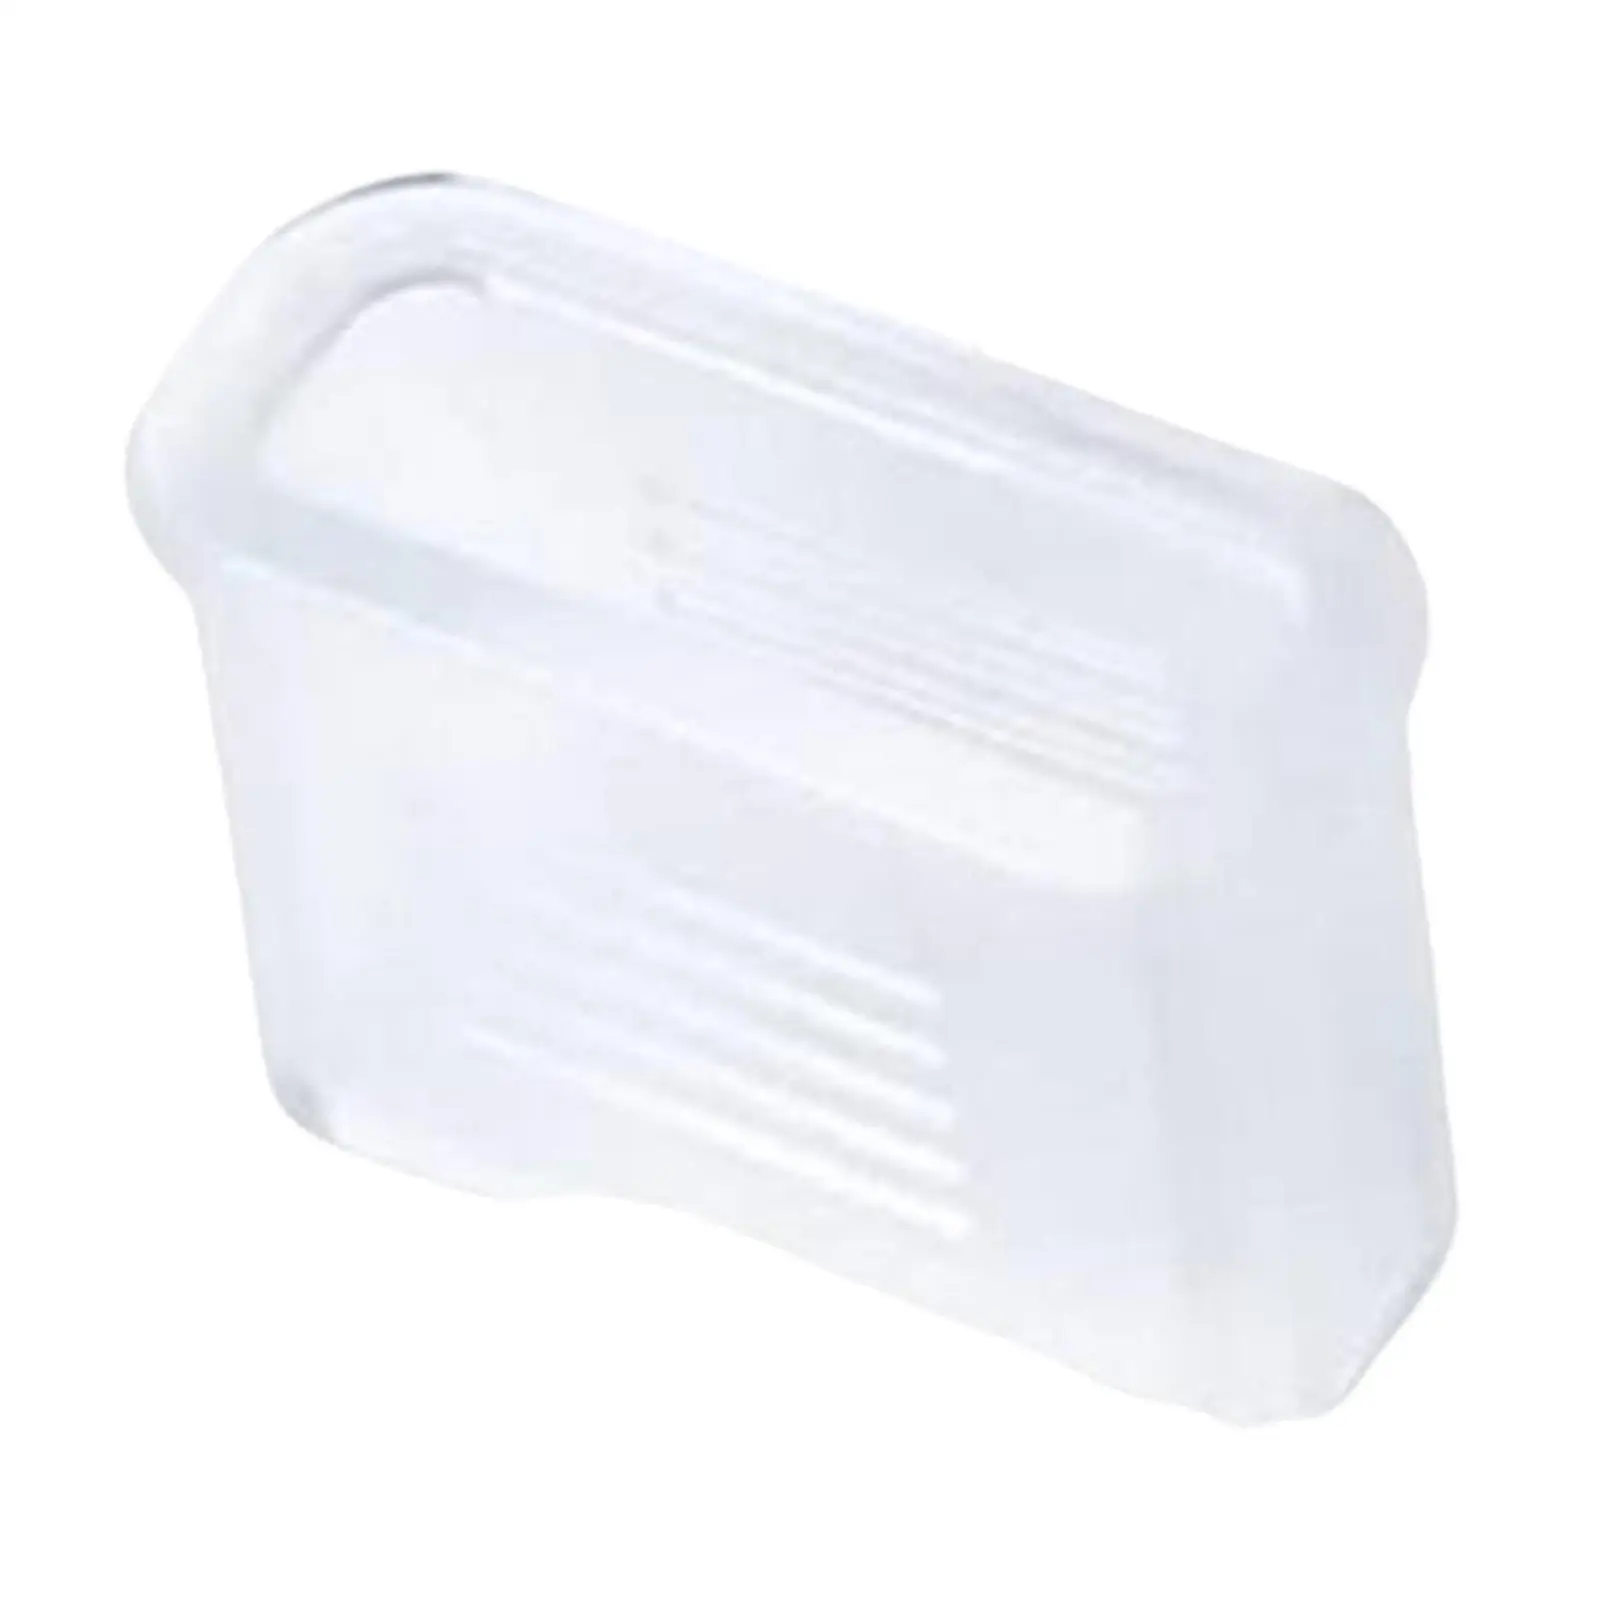 Whistle Cover Accessories White PVC Replaceable Mouth Protector for Teachers